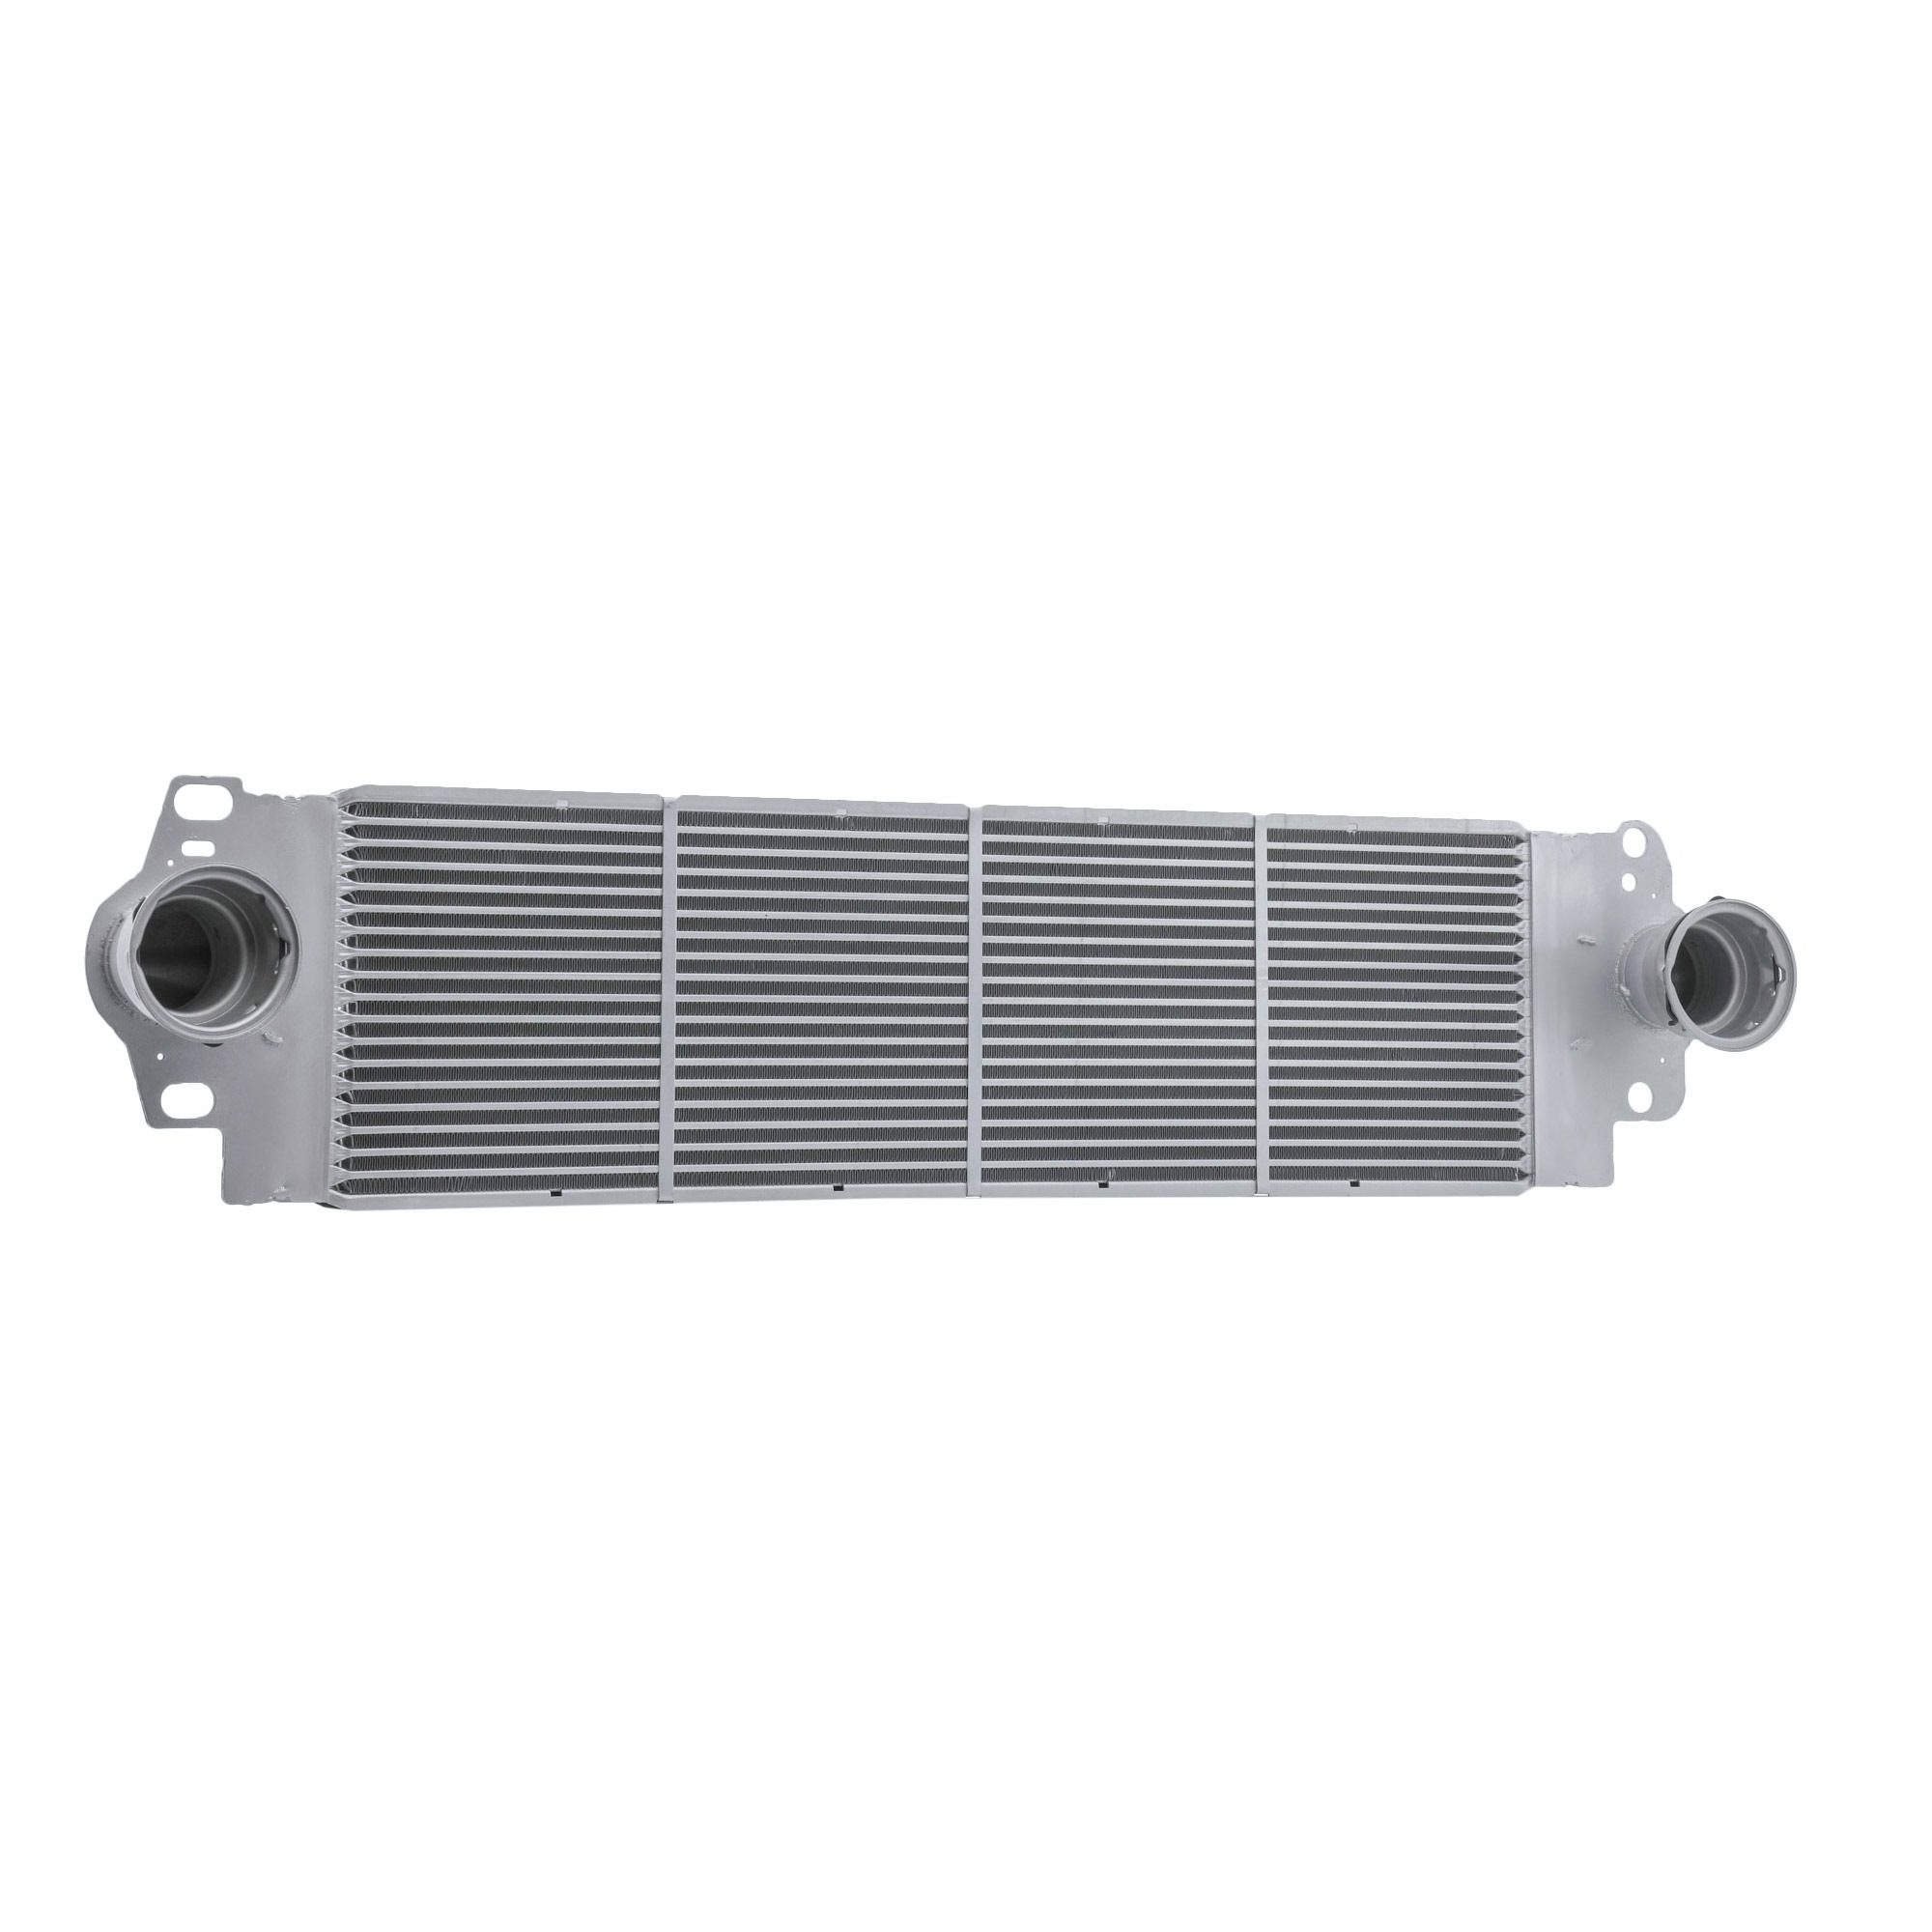 STARK SKICC-0890003 Intercooler VW experience and price